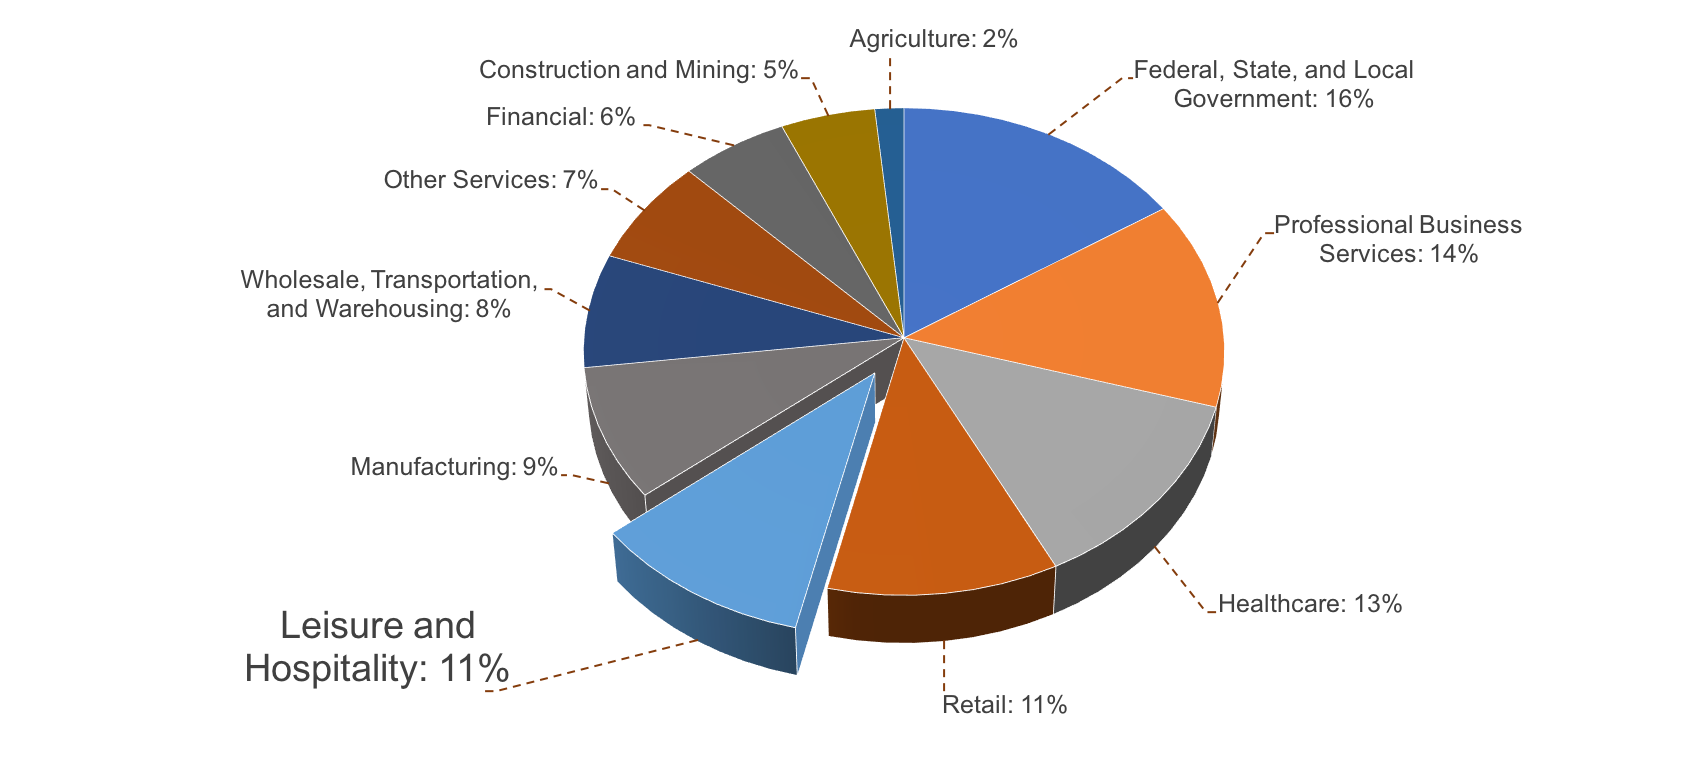 A pie chart of the percentages of U.S. employment, separated by industry. Listed in order from largest percentage to smallest percentage: Federal, State, and Local Government, 16%; Professional Business Services, 14%; Healthcare, 13%; Retail, 11%; Leisure and Hospitality, 11%; Manufacturing, 9%; Wholesale, Transportation, and Warehousing, 8%; Other Services, 7%; Financial, 6%; Construction and Mining, 5%.